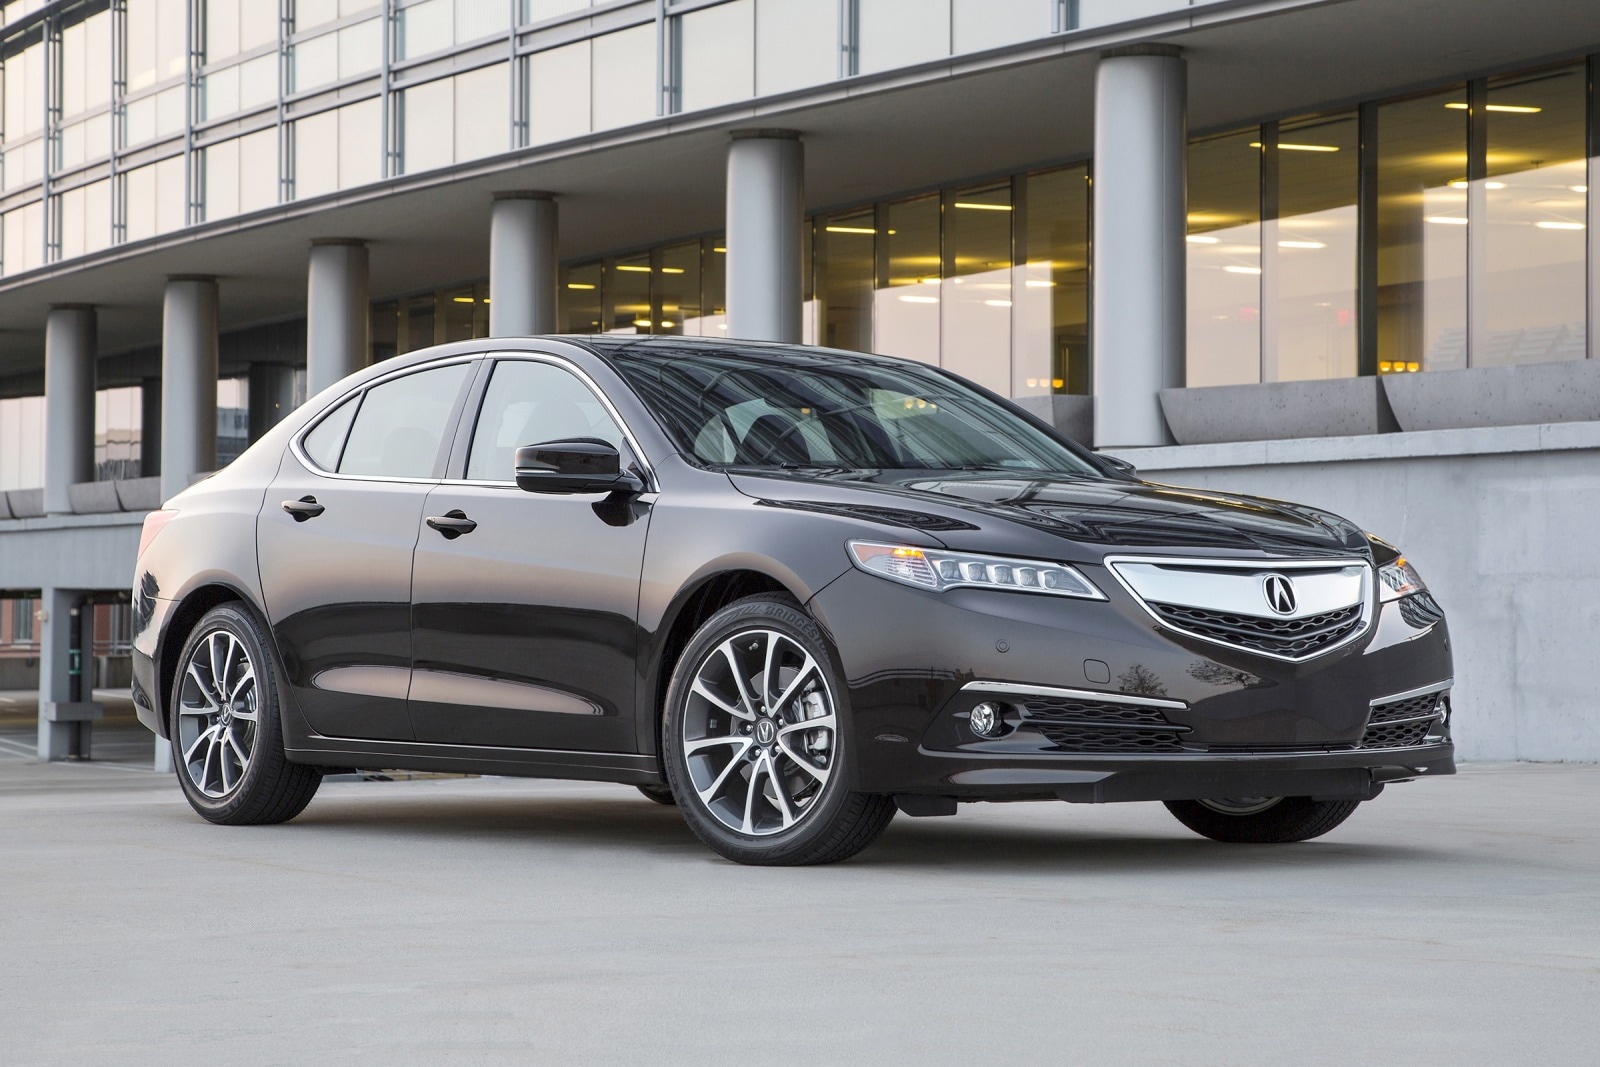 2017 Acura TLX Review & Ratings | Edmunds